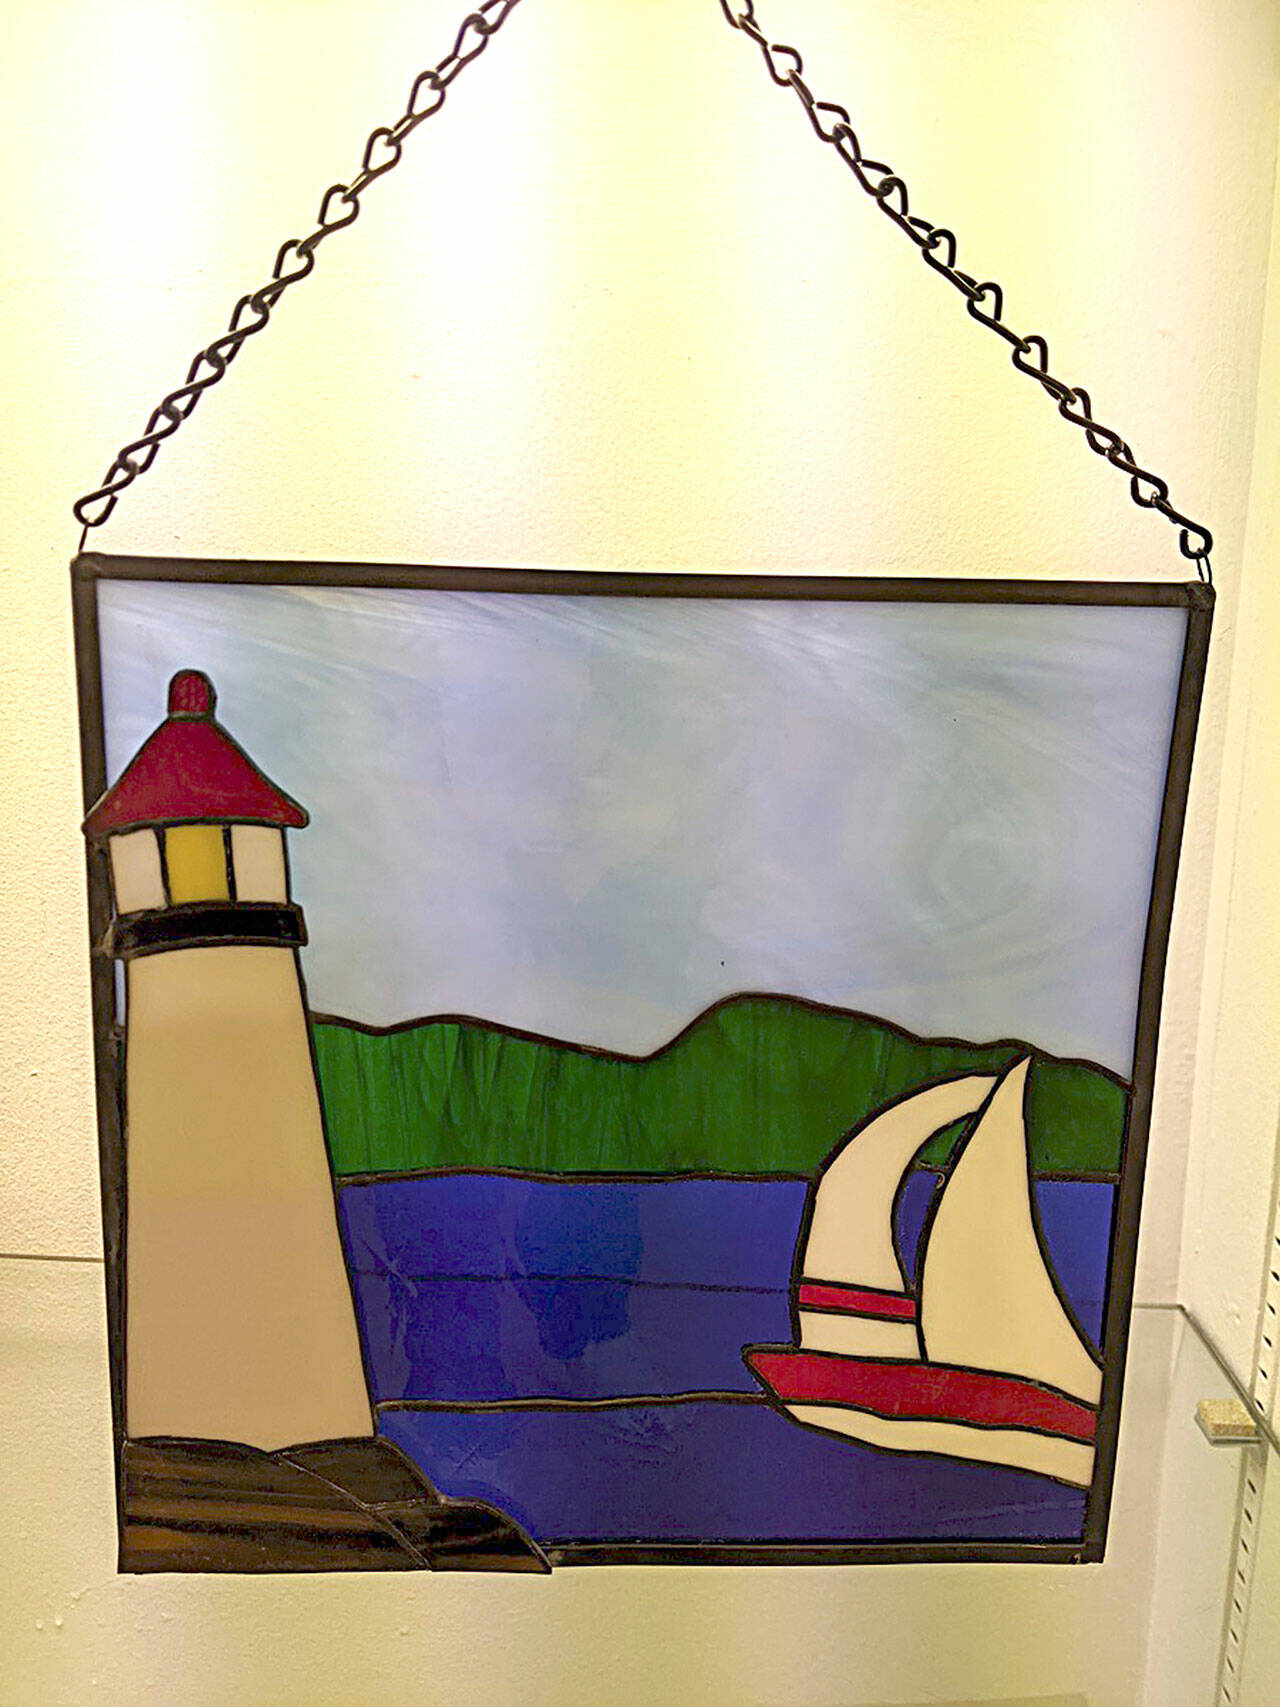 June Echternkamp is one of the featured artists at the Blue Whole Gallery in July. “Sailing,” a stained glass work, is one of her many pieces on display. (Submitted photo)